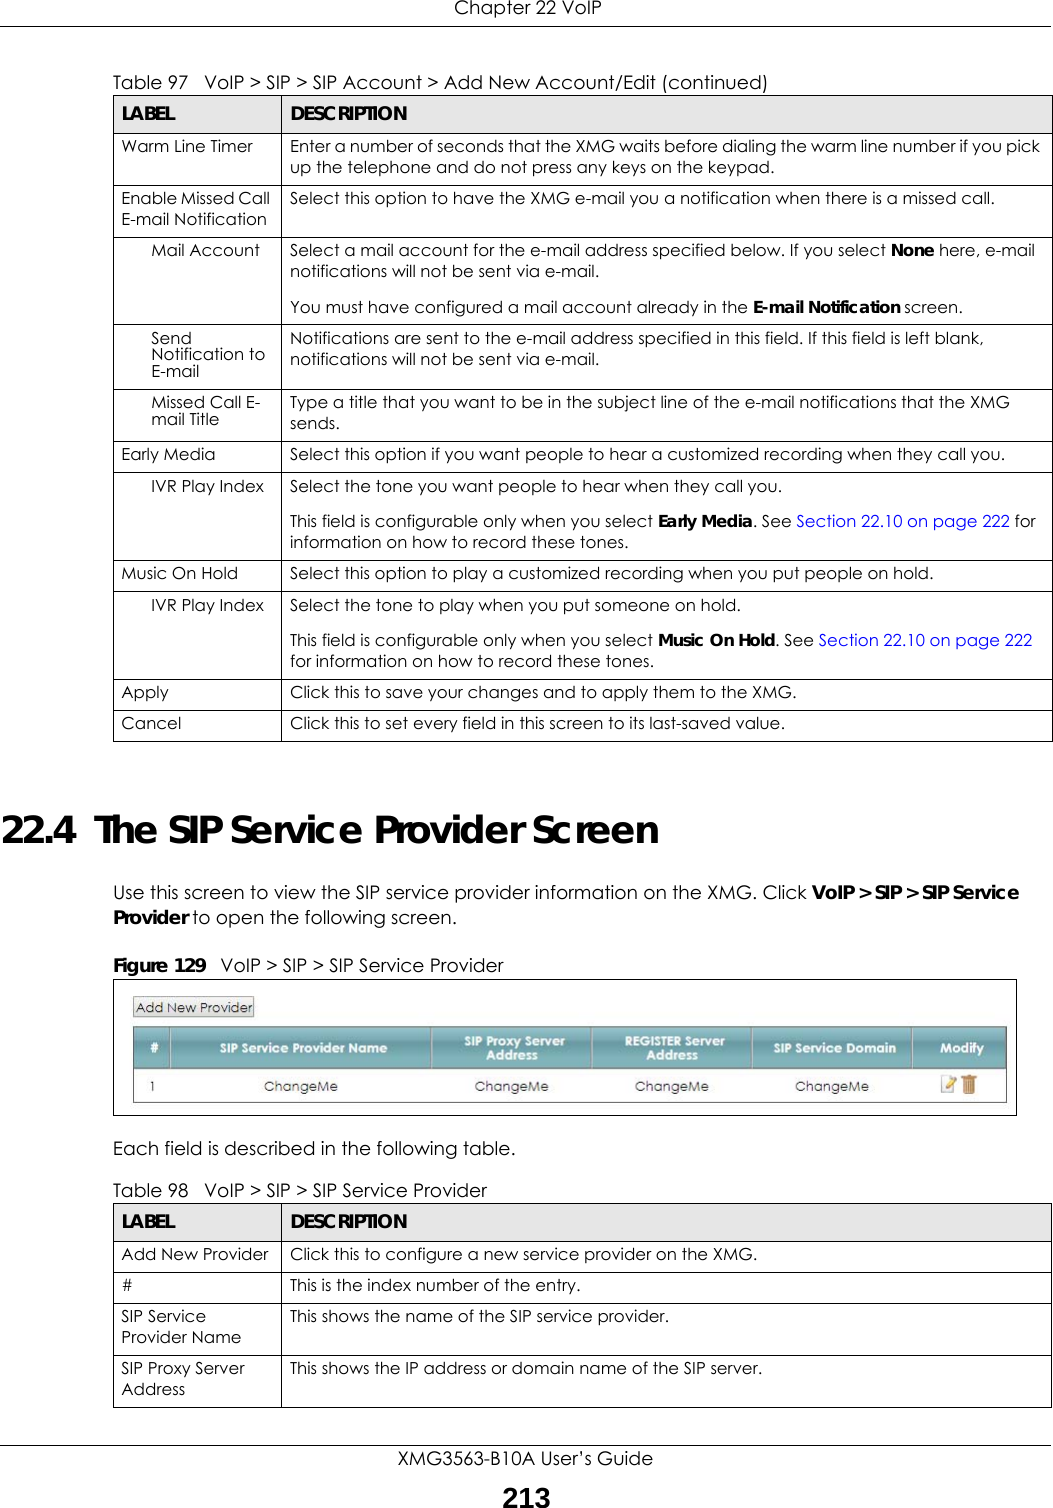  Chapter 22 VoIPXMG3563-B10A User’s Guide21322.4  The SIP Service Provider Screen Use this screen to view the SIP service provider information on the XMG. Click VoIP &gt; SIP &gt; SIP Service Provider to open the following screen. Figure 129   VoIP &gt; SIP &gt; SIP Service ProviderEach field is described in the following table.Warm Line Timer  Enter a number of seconds that the XMG waits before dialing the warm line number if you pick up the telephone and do not press any keys on the keypad.Enable Missed Call E-mail NotificationSelect this option to have the XMG e-mail you a notification when there is a missed call.Mail Account Select a mail account for the e-mail address specified below. If you select None here, e-mail notifications will not be sent via e-mail.You must have configured a mail account already in the E-mail Notification screen.Send Notification to E-mailNotifications are sent to the e-mail address specified in this field. If this field is left blank, notifications will not be sent via e-mail.Missed Call E-mail Title Type a title that you want to be in the subject line of the e-mail notifications that the XMG sends.Early Media Select this option if you want people to hear a customized recording when they call you.IVR Play Index Select the tone you want people to hear when they call you.This field is configurable only when you select Early Media. See Section 22.10 on page 222 for information on how to record these tones.Music On Hold Select this option to play a customized recording when you put people on hold.IVR Play Index Select the tone to play when you put someone on hold.This field is configurable only when you select Music On Hold. See Section 22.10 on page 222 for information on how to record these tones.Apply Click this to save your changes and to apply them to the XMG.Cancel Click this to set every field in this screen to its last-saved value.Table 97   VoIP &gt; SIP &gt; SIP Account &gt; Add New Account/Edit (continued)LABEL DESCRIPTIONTable 98   VoIP &gt; SIP &gt; SIP Service ProviderLABEL DESCRIPTIONAdd New Provider Click this to configure a new service provider on the XMG.# This is the index number of the entry.SIP Service Provider Name This shows the name of the SIP service provider.SIP Proxy Server AddressThis shows the IP address or domain name of the SIP server.